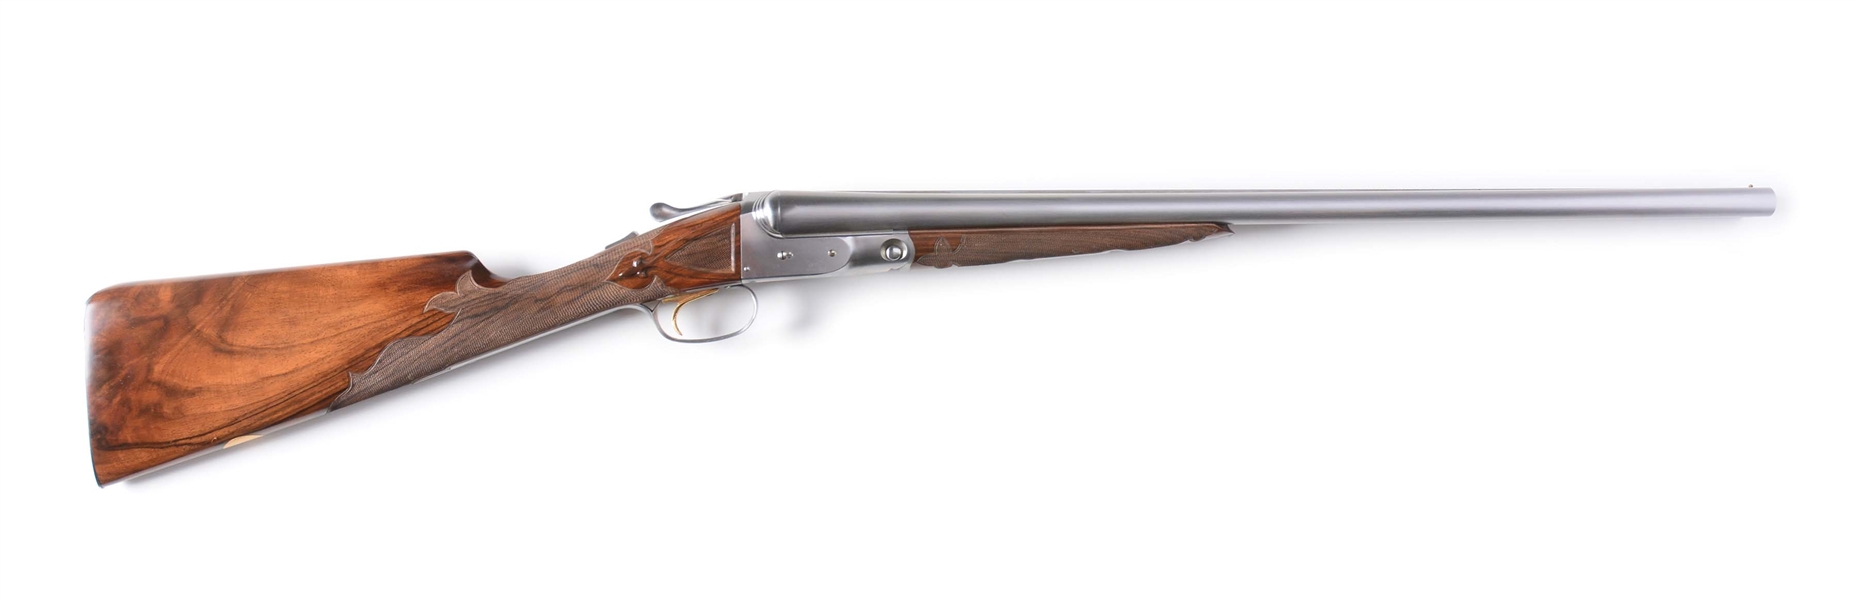 (M) PARKER REPRODUCTION A-1 SPECIAL 12 GAUGE  SHOTGUN IN THE WHITE AND IN ITS ORIGINAL BOX